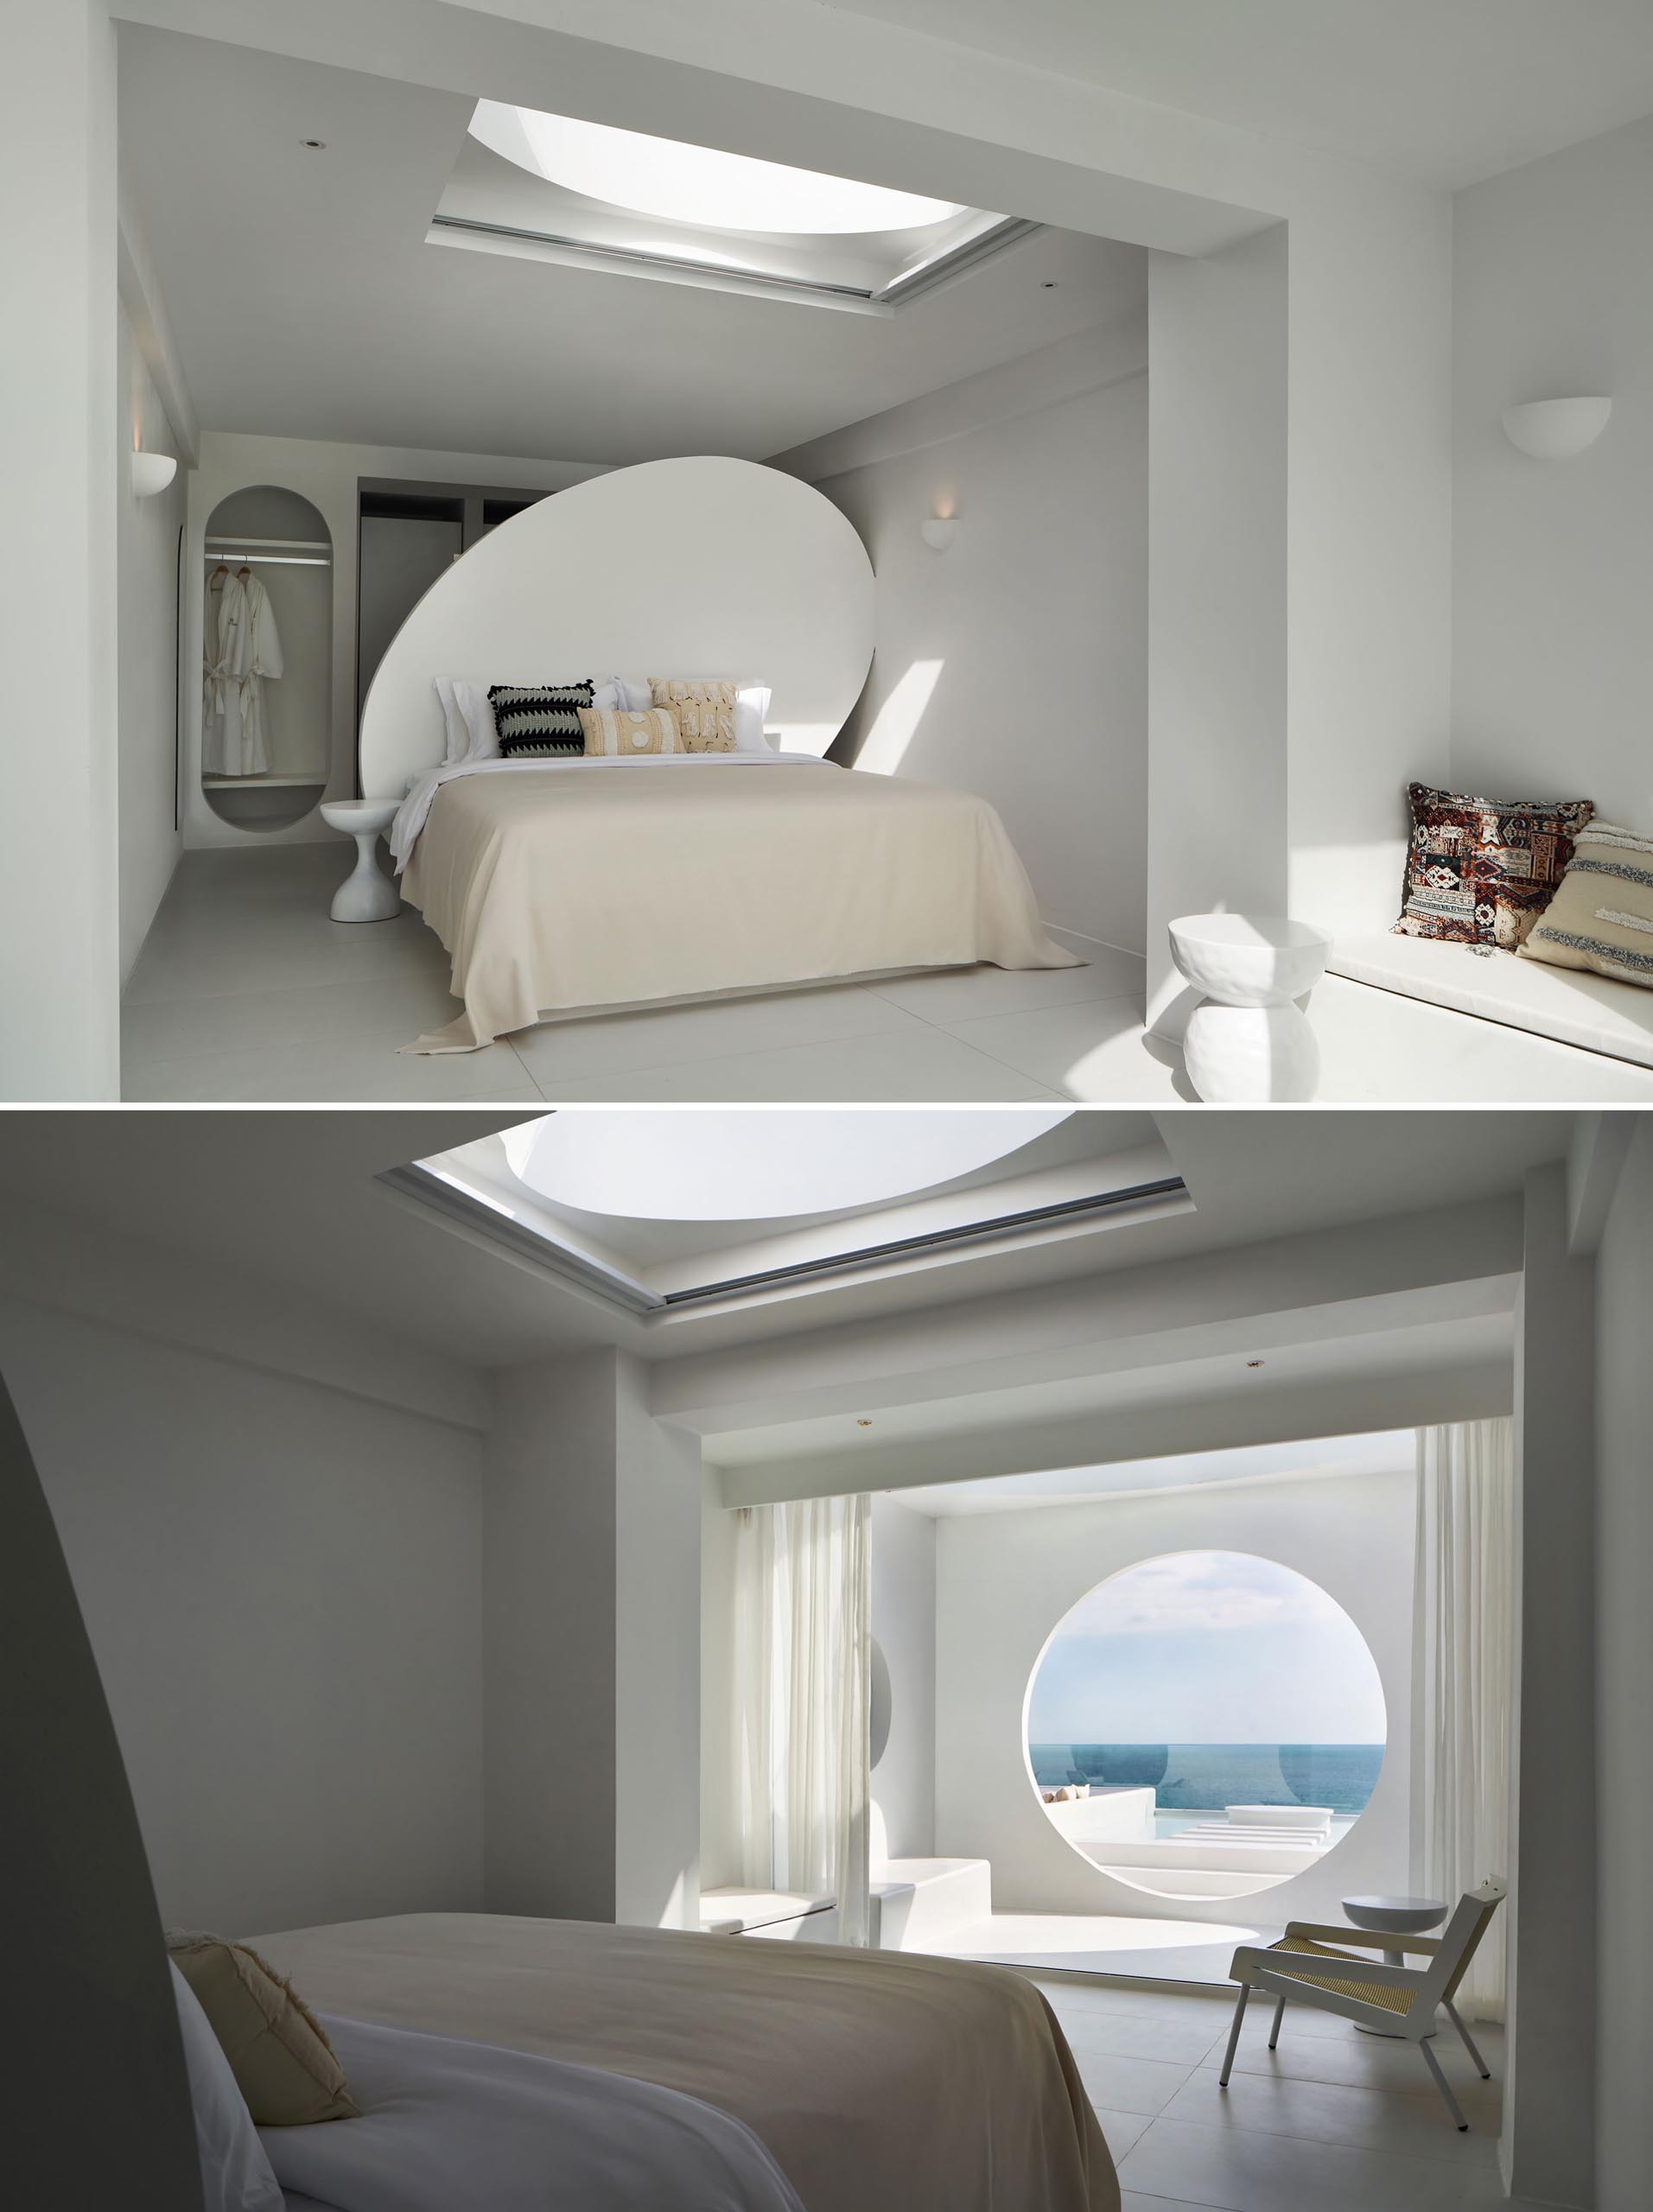 A modern hotel room with circular accents.